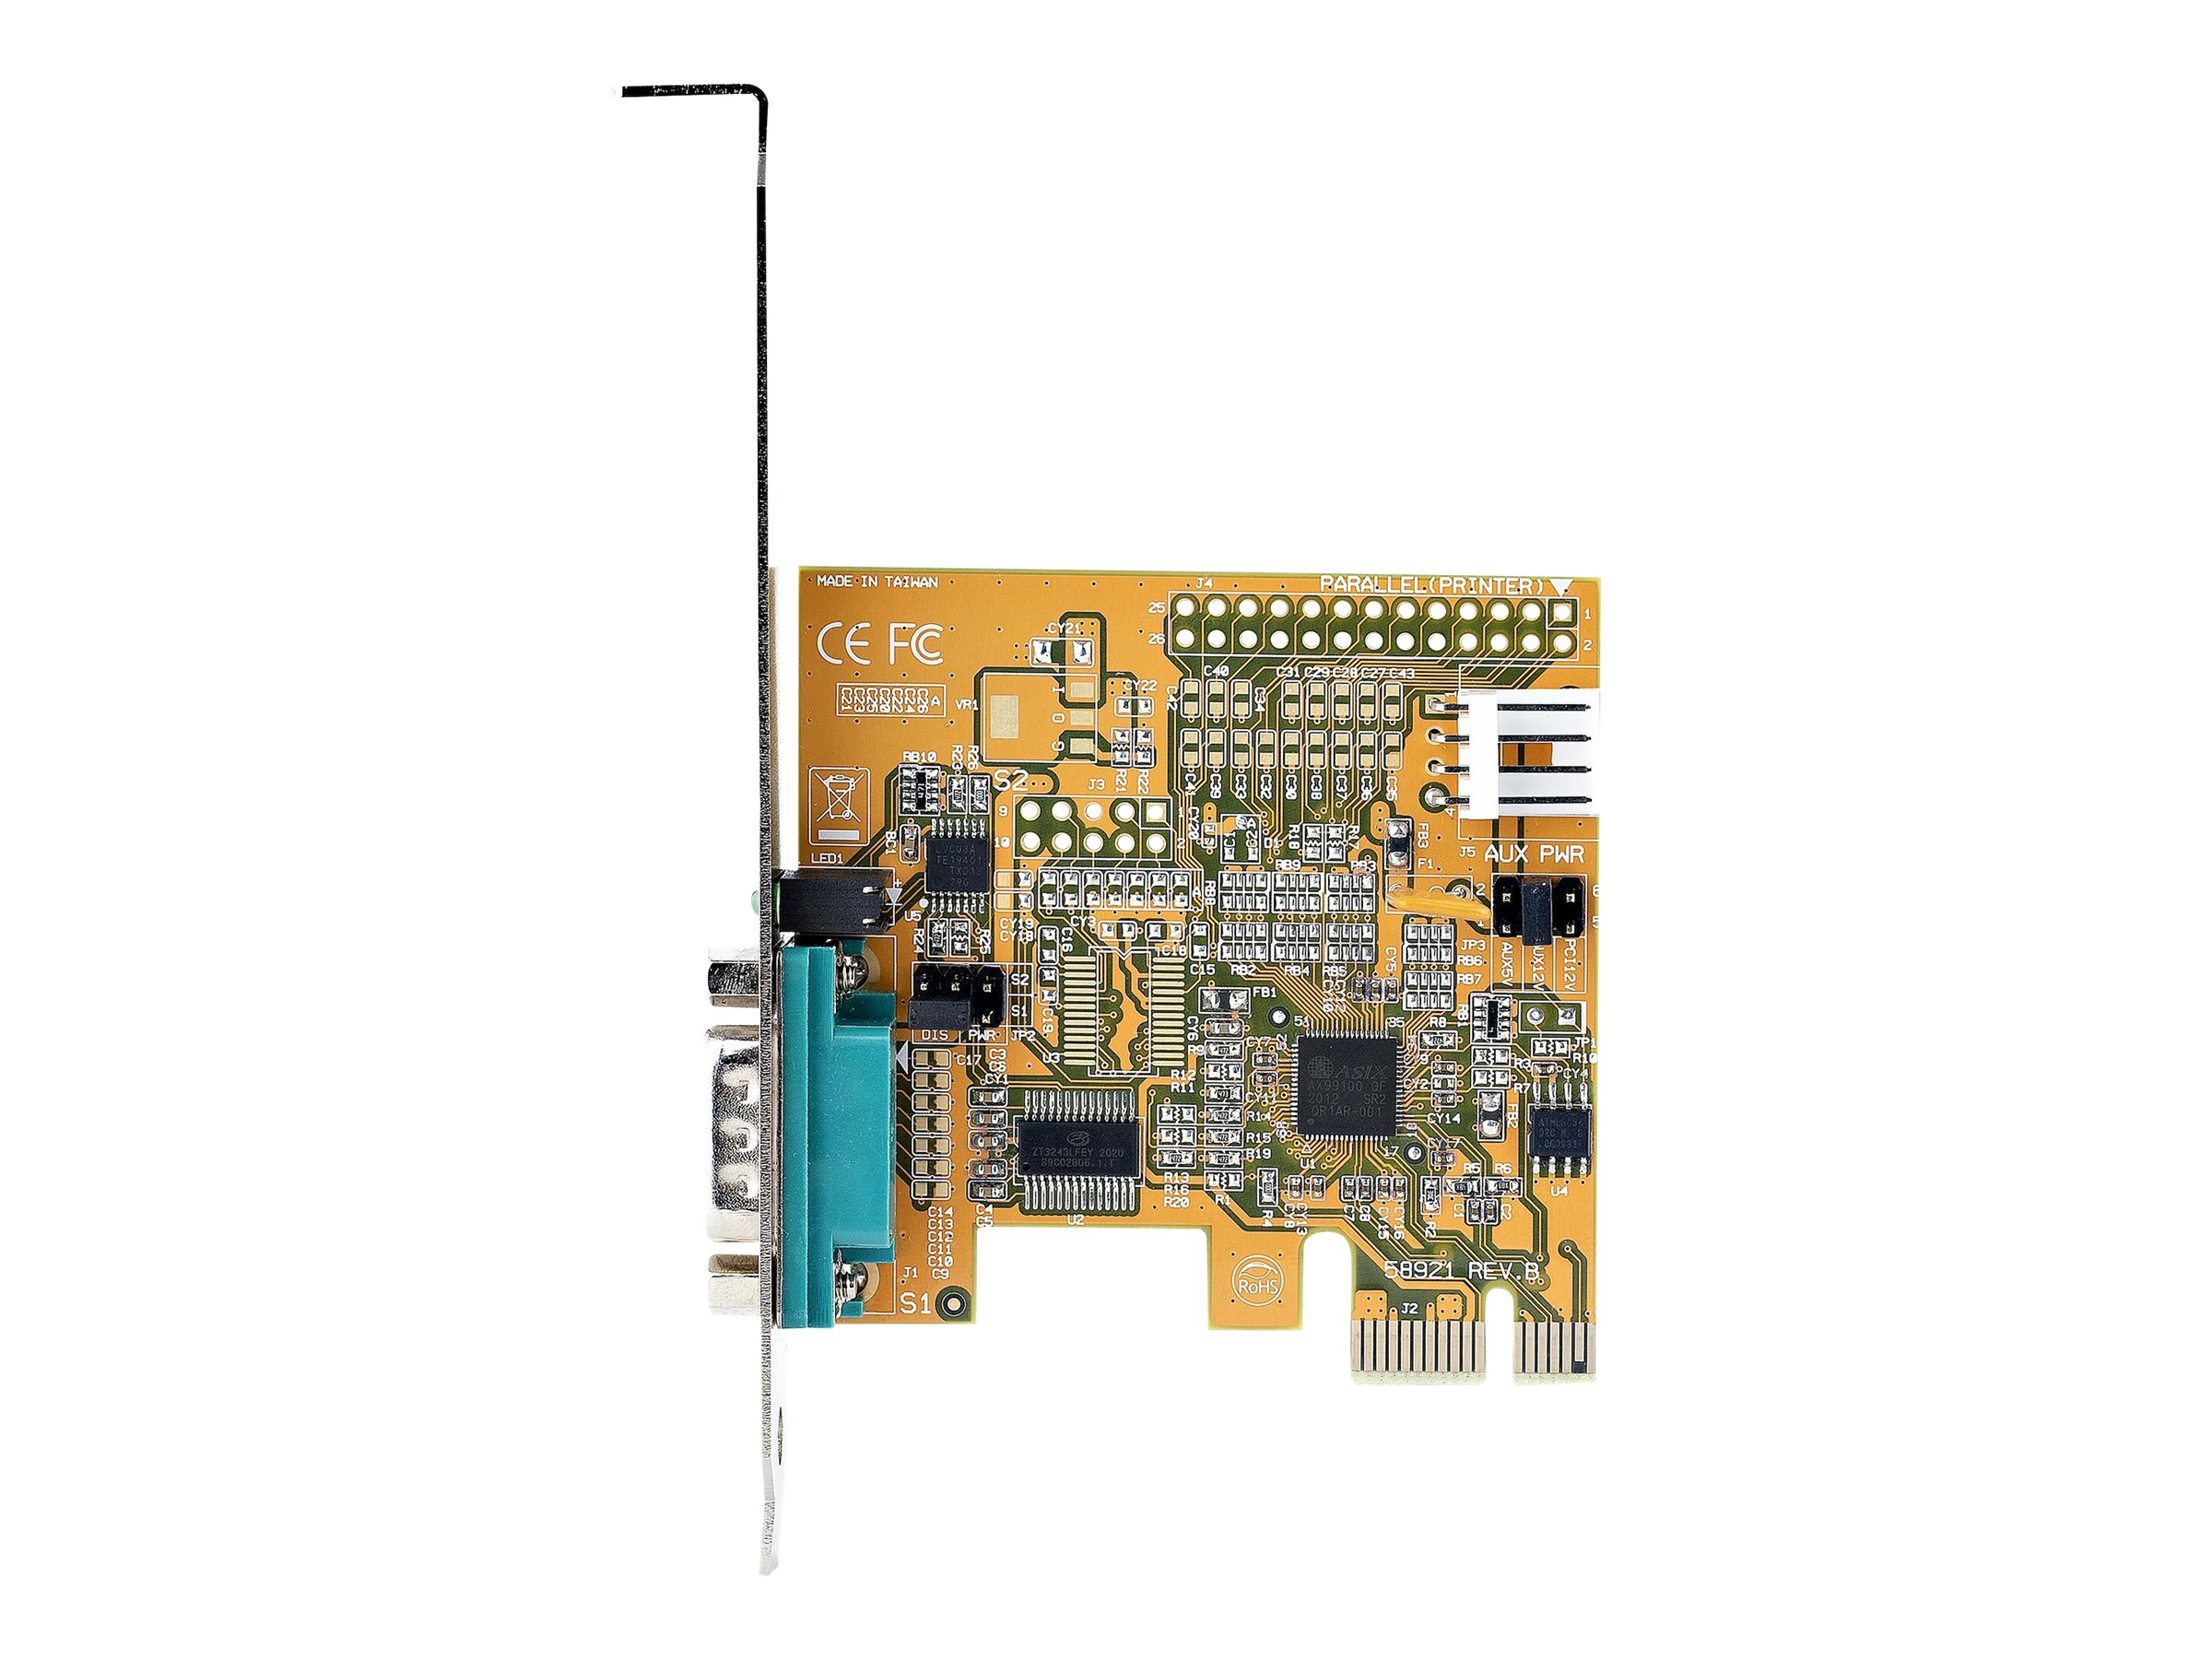 StarTech.com PCI Express Serial Card, PCIe to RS232 (DB9)